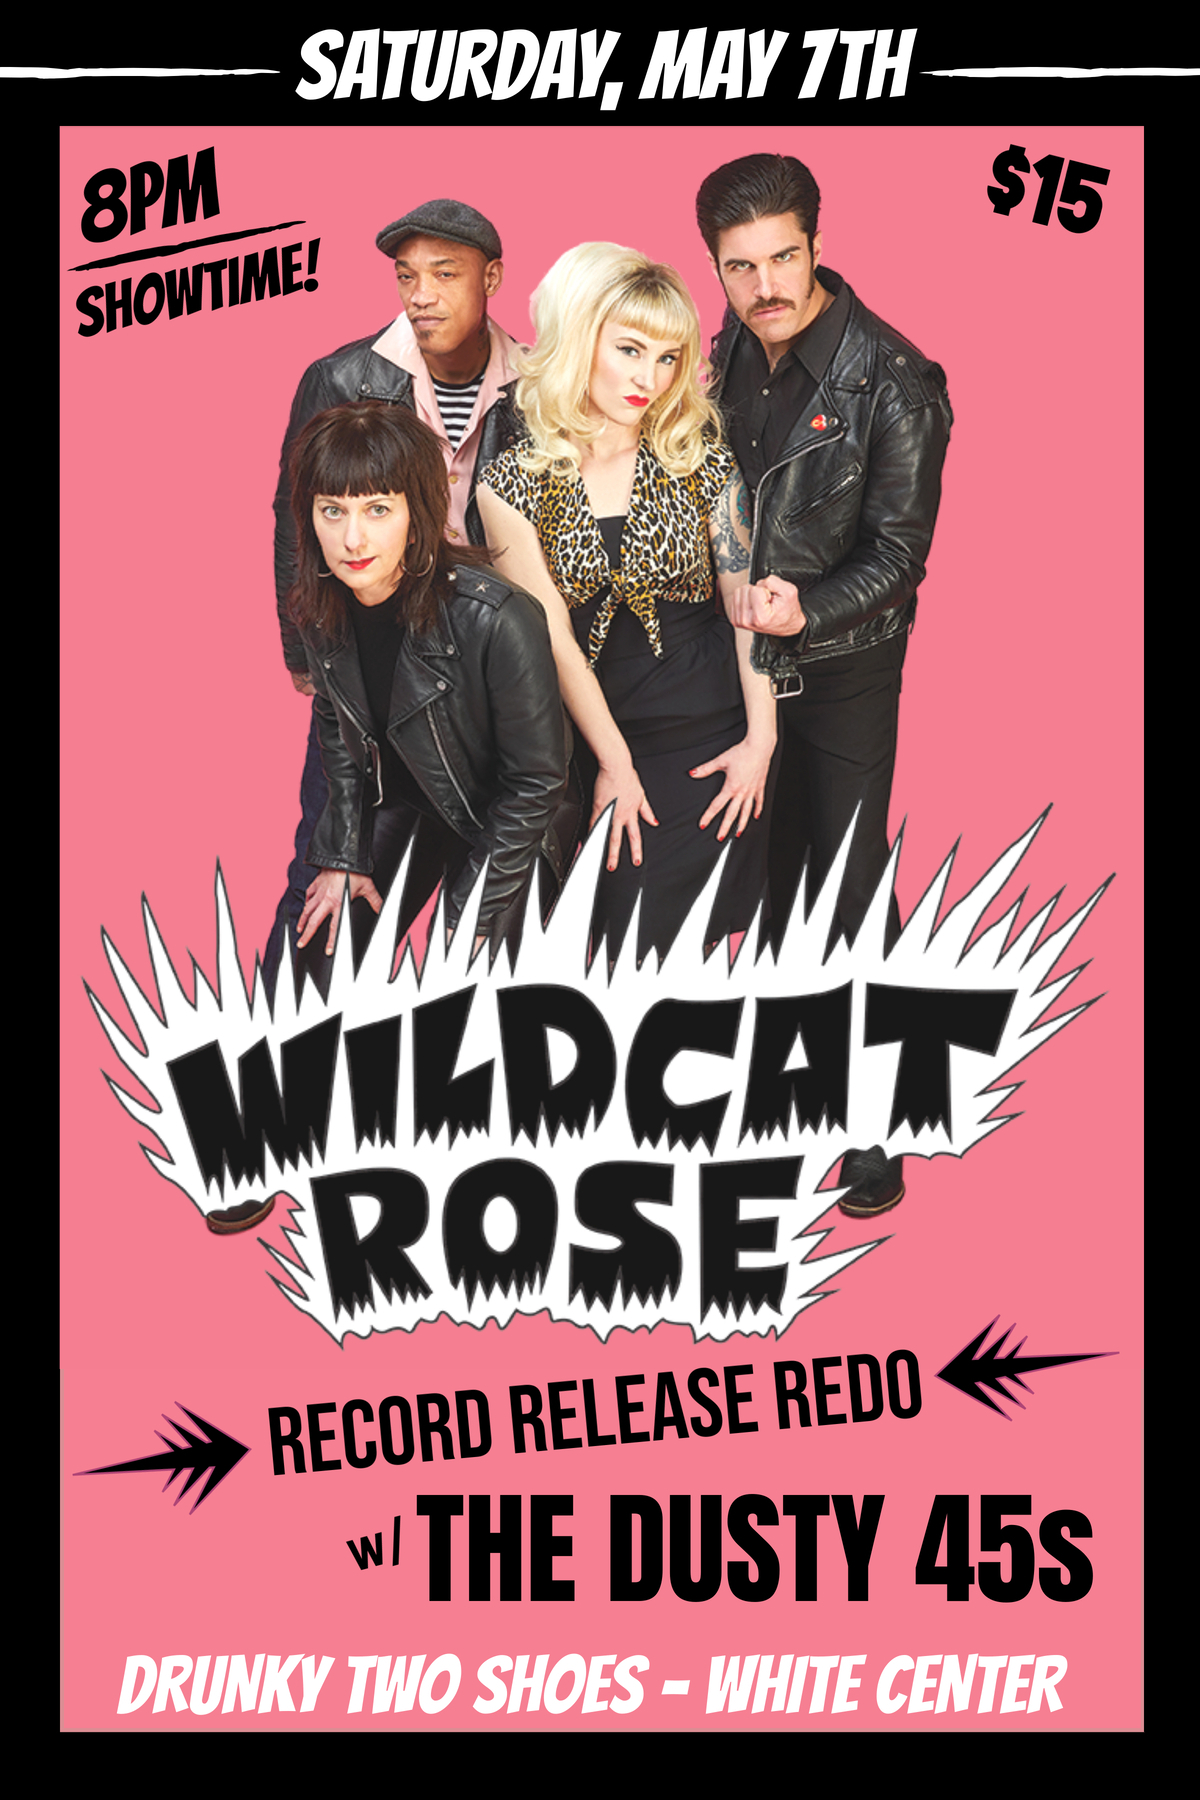 RECORD RELEASE REDO! MAY 7TH, 2022 WILDCAT ROSE